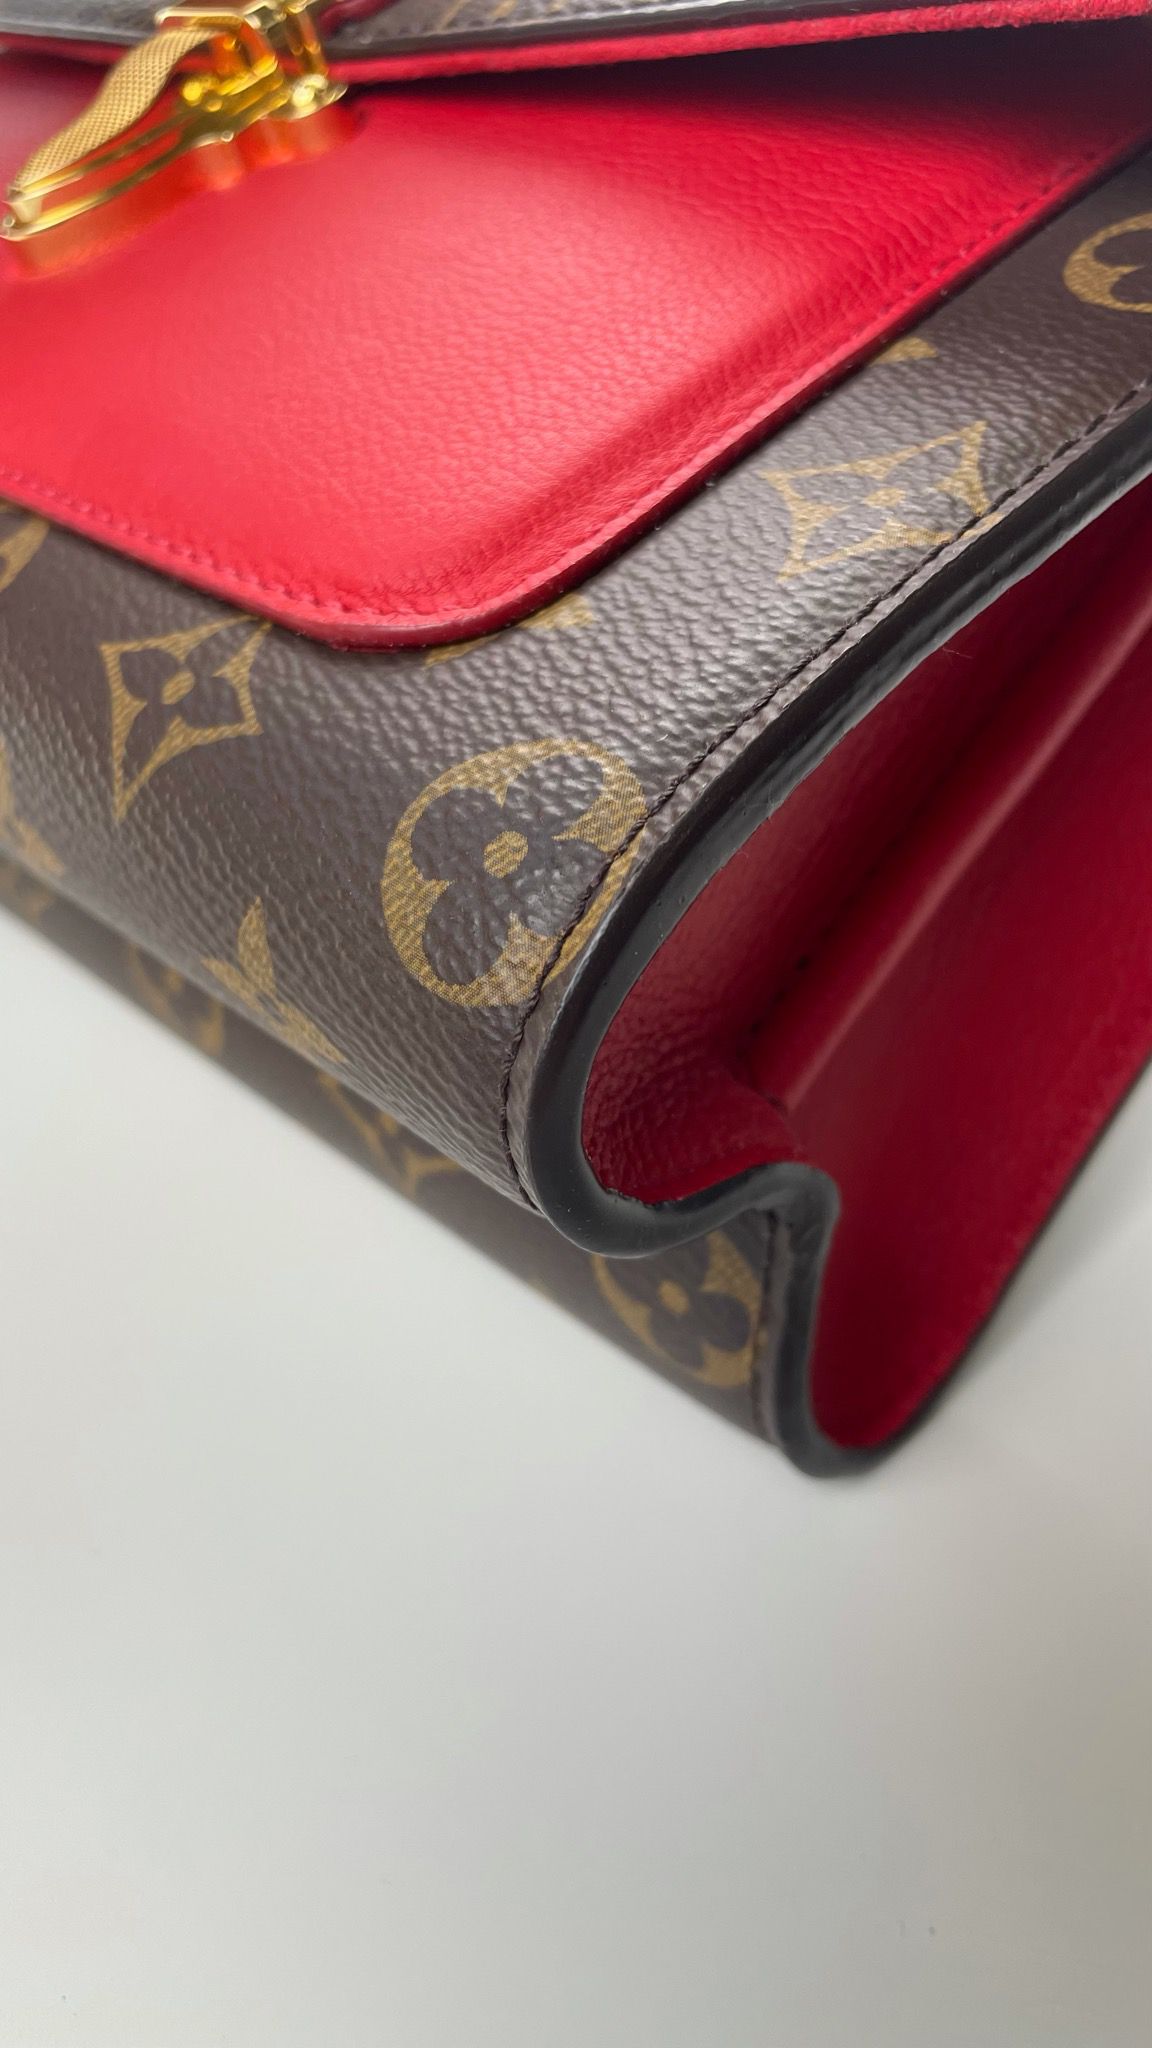 Only 878.00 usd for LOUIS VUITTON Victoire Monogram Canvas Crossbody Bag  Black Online at the Shop